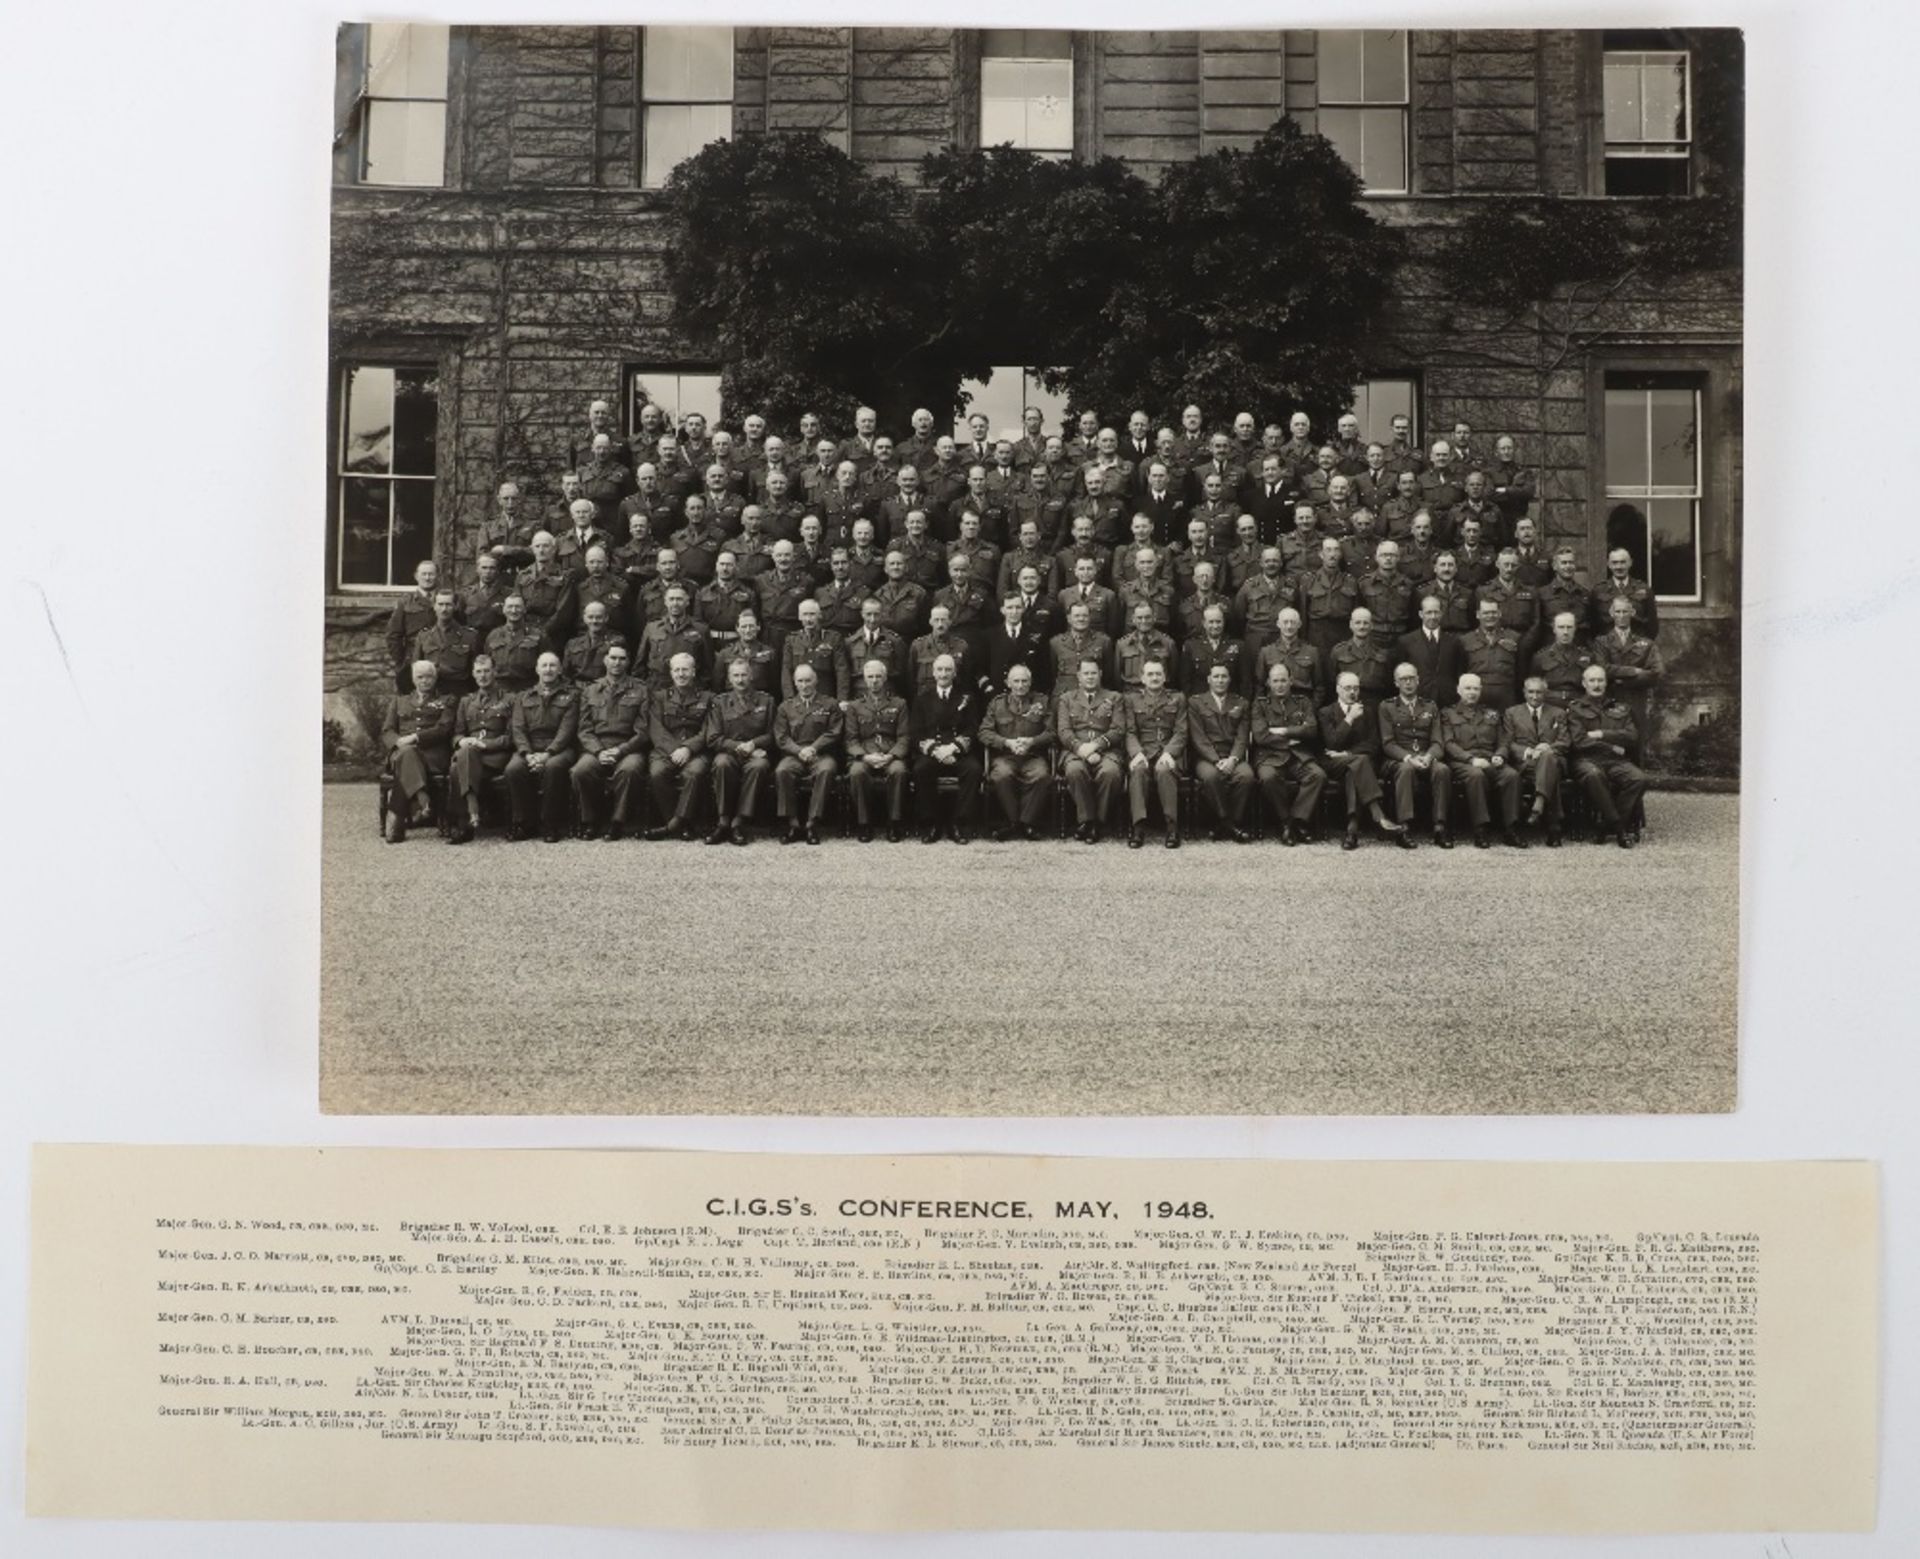 Important Group Photograph at C.I.G.S's Conference May 1948 - Image 2 of 3